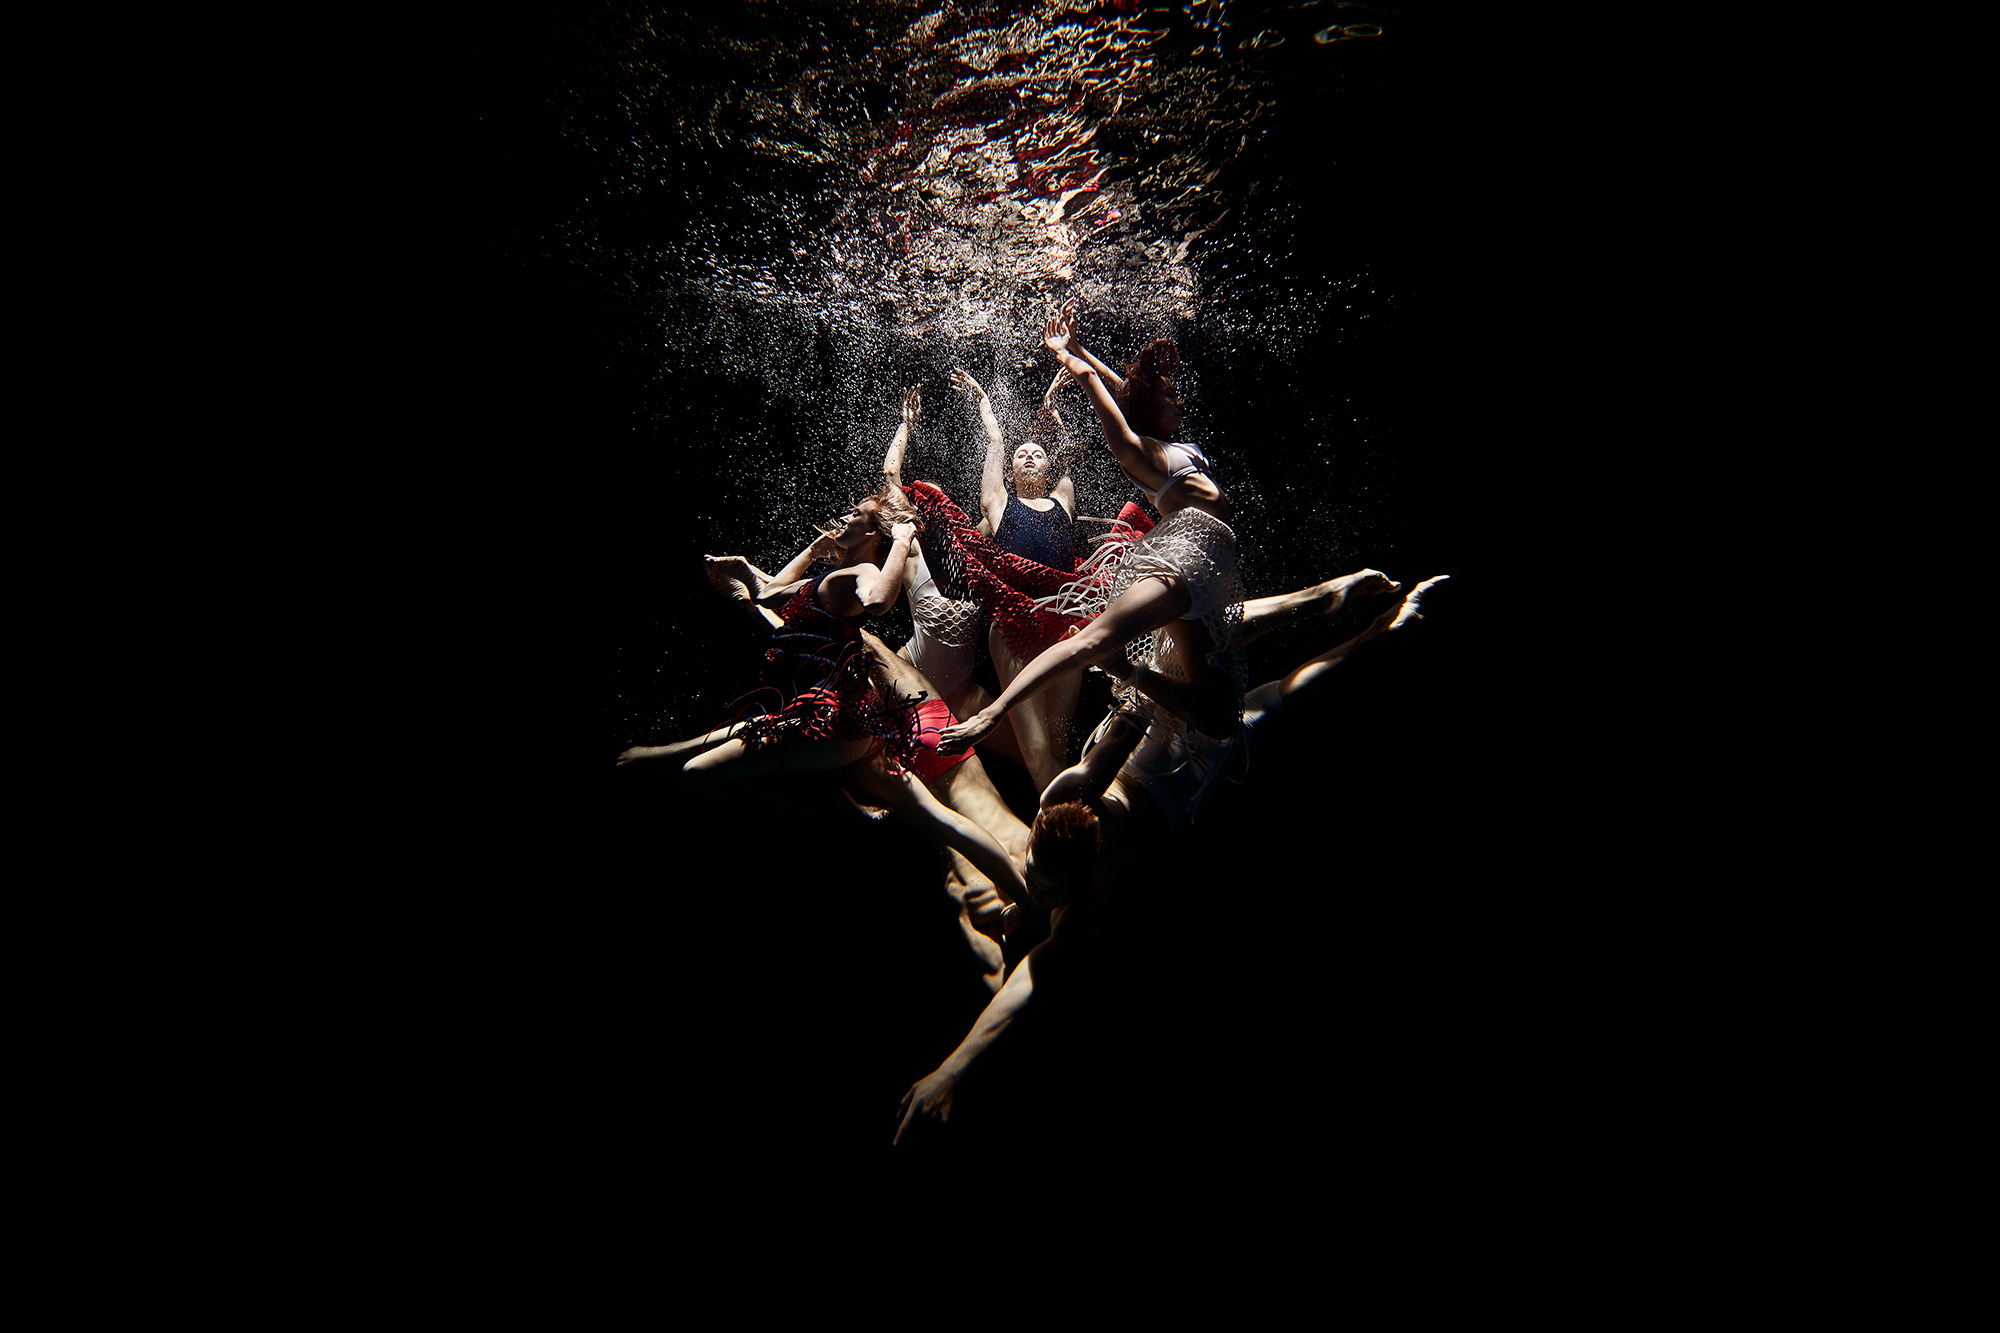 'Liberty' from our Underwater Dance series. Come see it this weekend y'all!